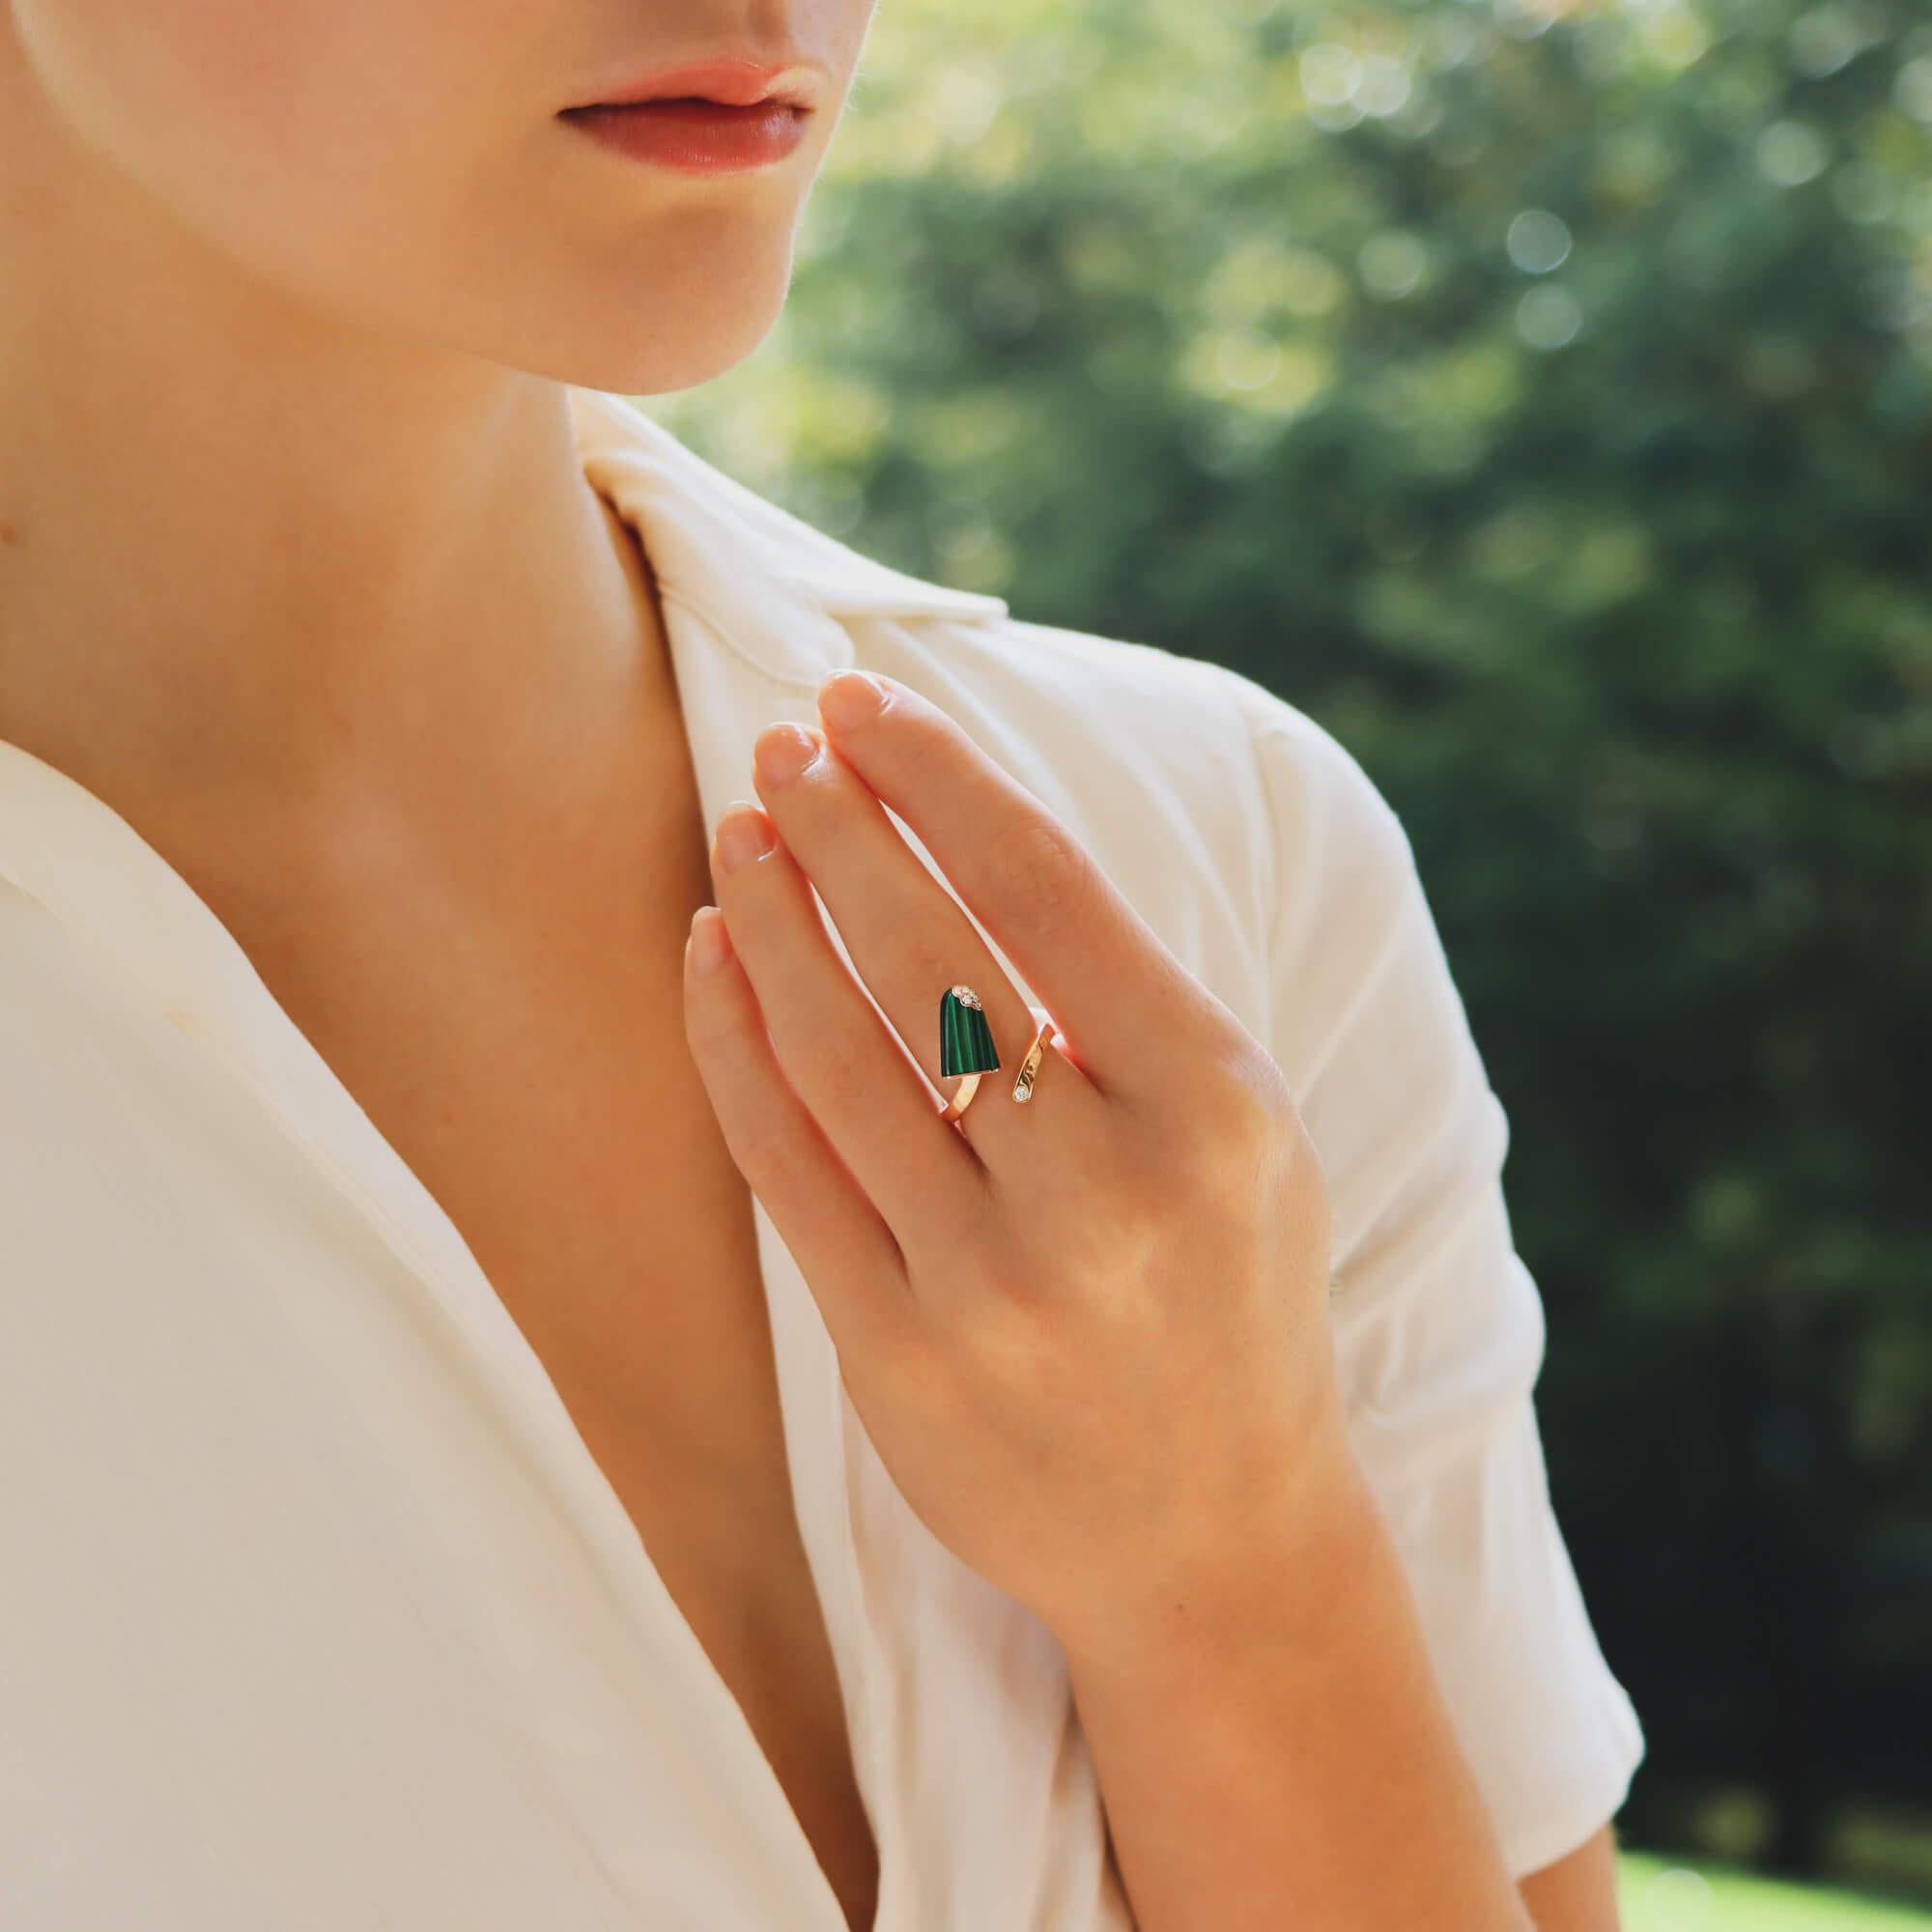 A stylish vintage Bvlgari malachite and diamond ‘Gelati’ ring set in 18k rose gold.

Fun and contemporary the Bulari Gelati ring recreates our favourite frozen treat as an opulent detail along an open rose gold band. Inset with a pop of colour from